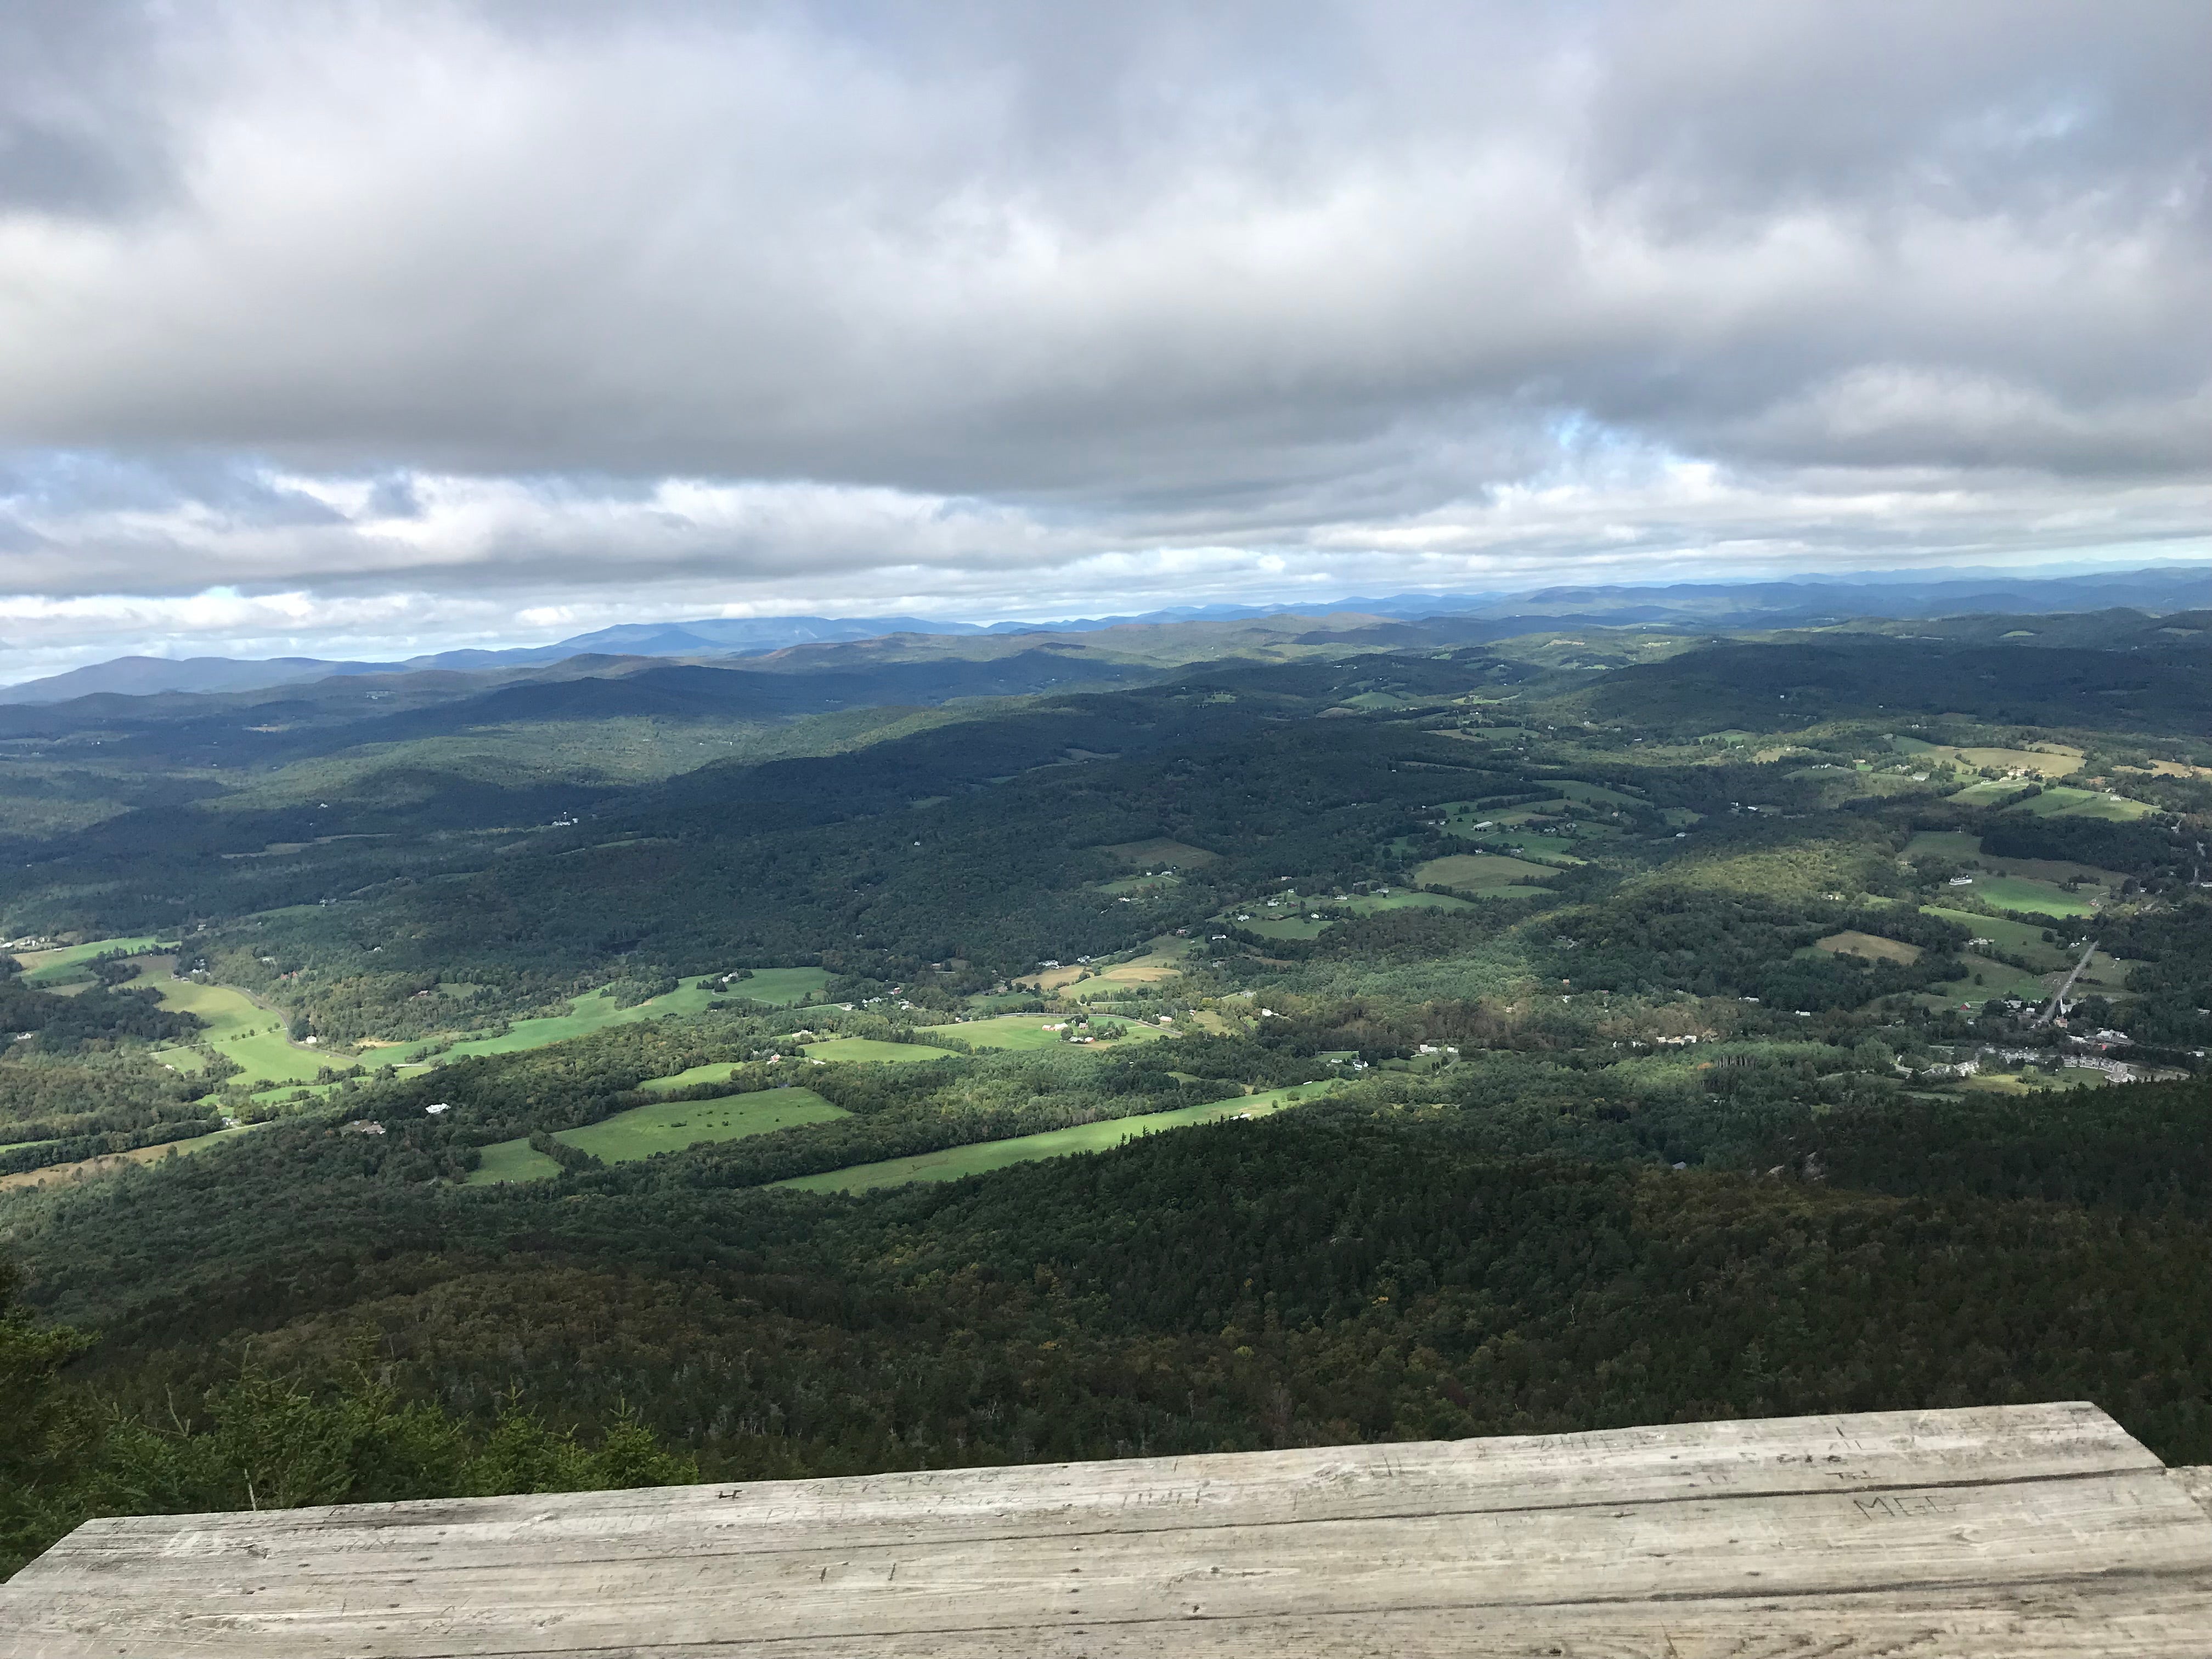 A view from a platform on Mt. Ascutney